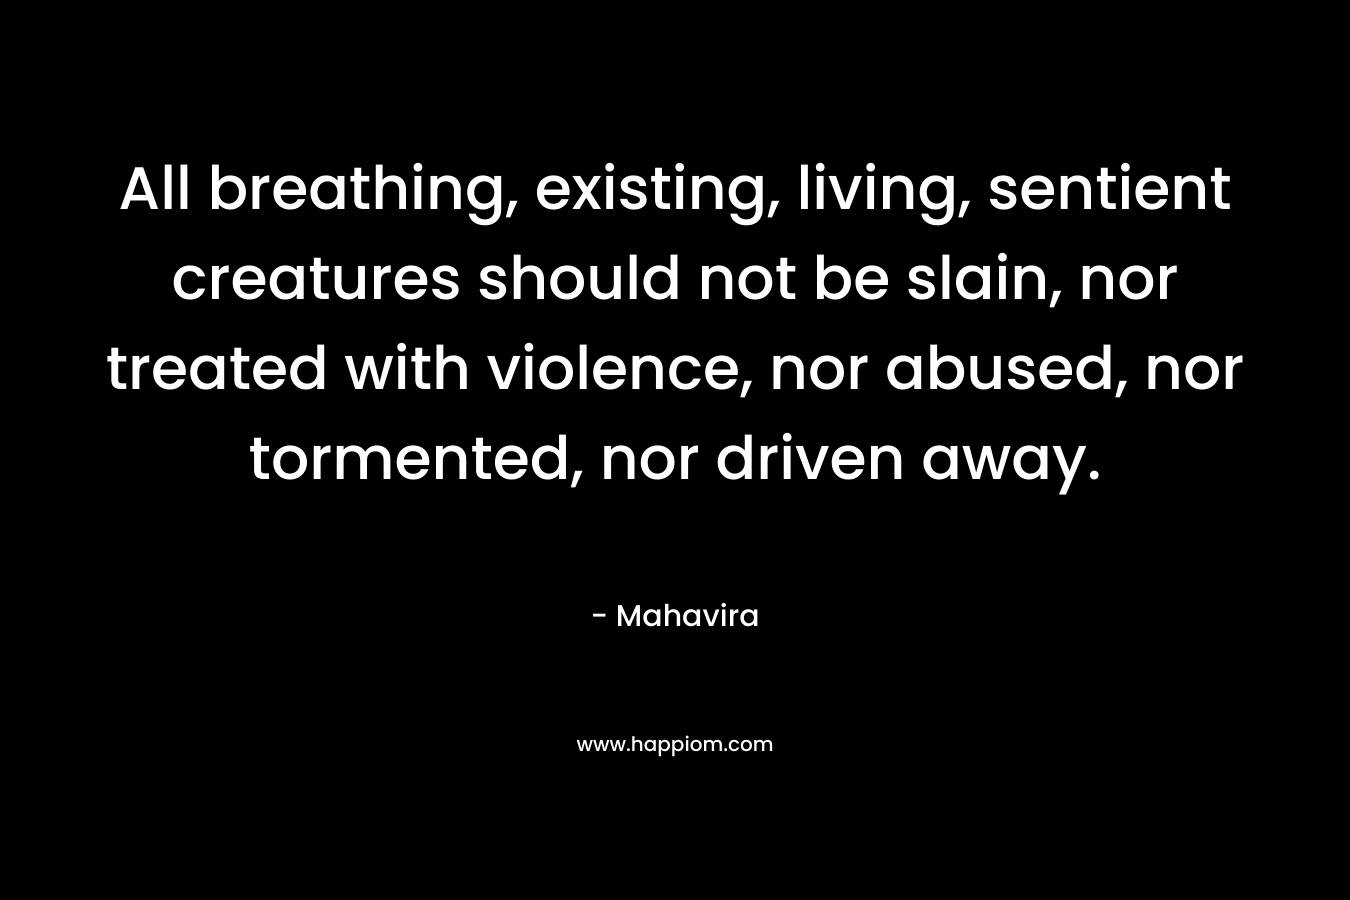 All breathing, existing, living, sentient creatures should not be slain, nor treated with violence, nor abused, nor tormented, nor driven away. – Mahavira